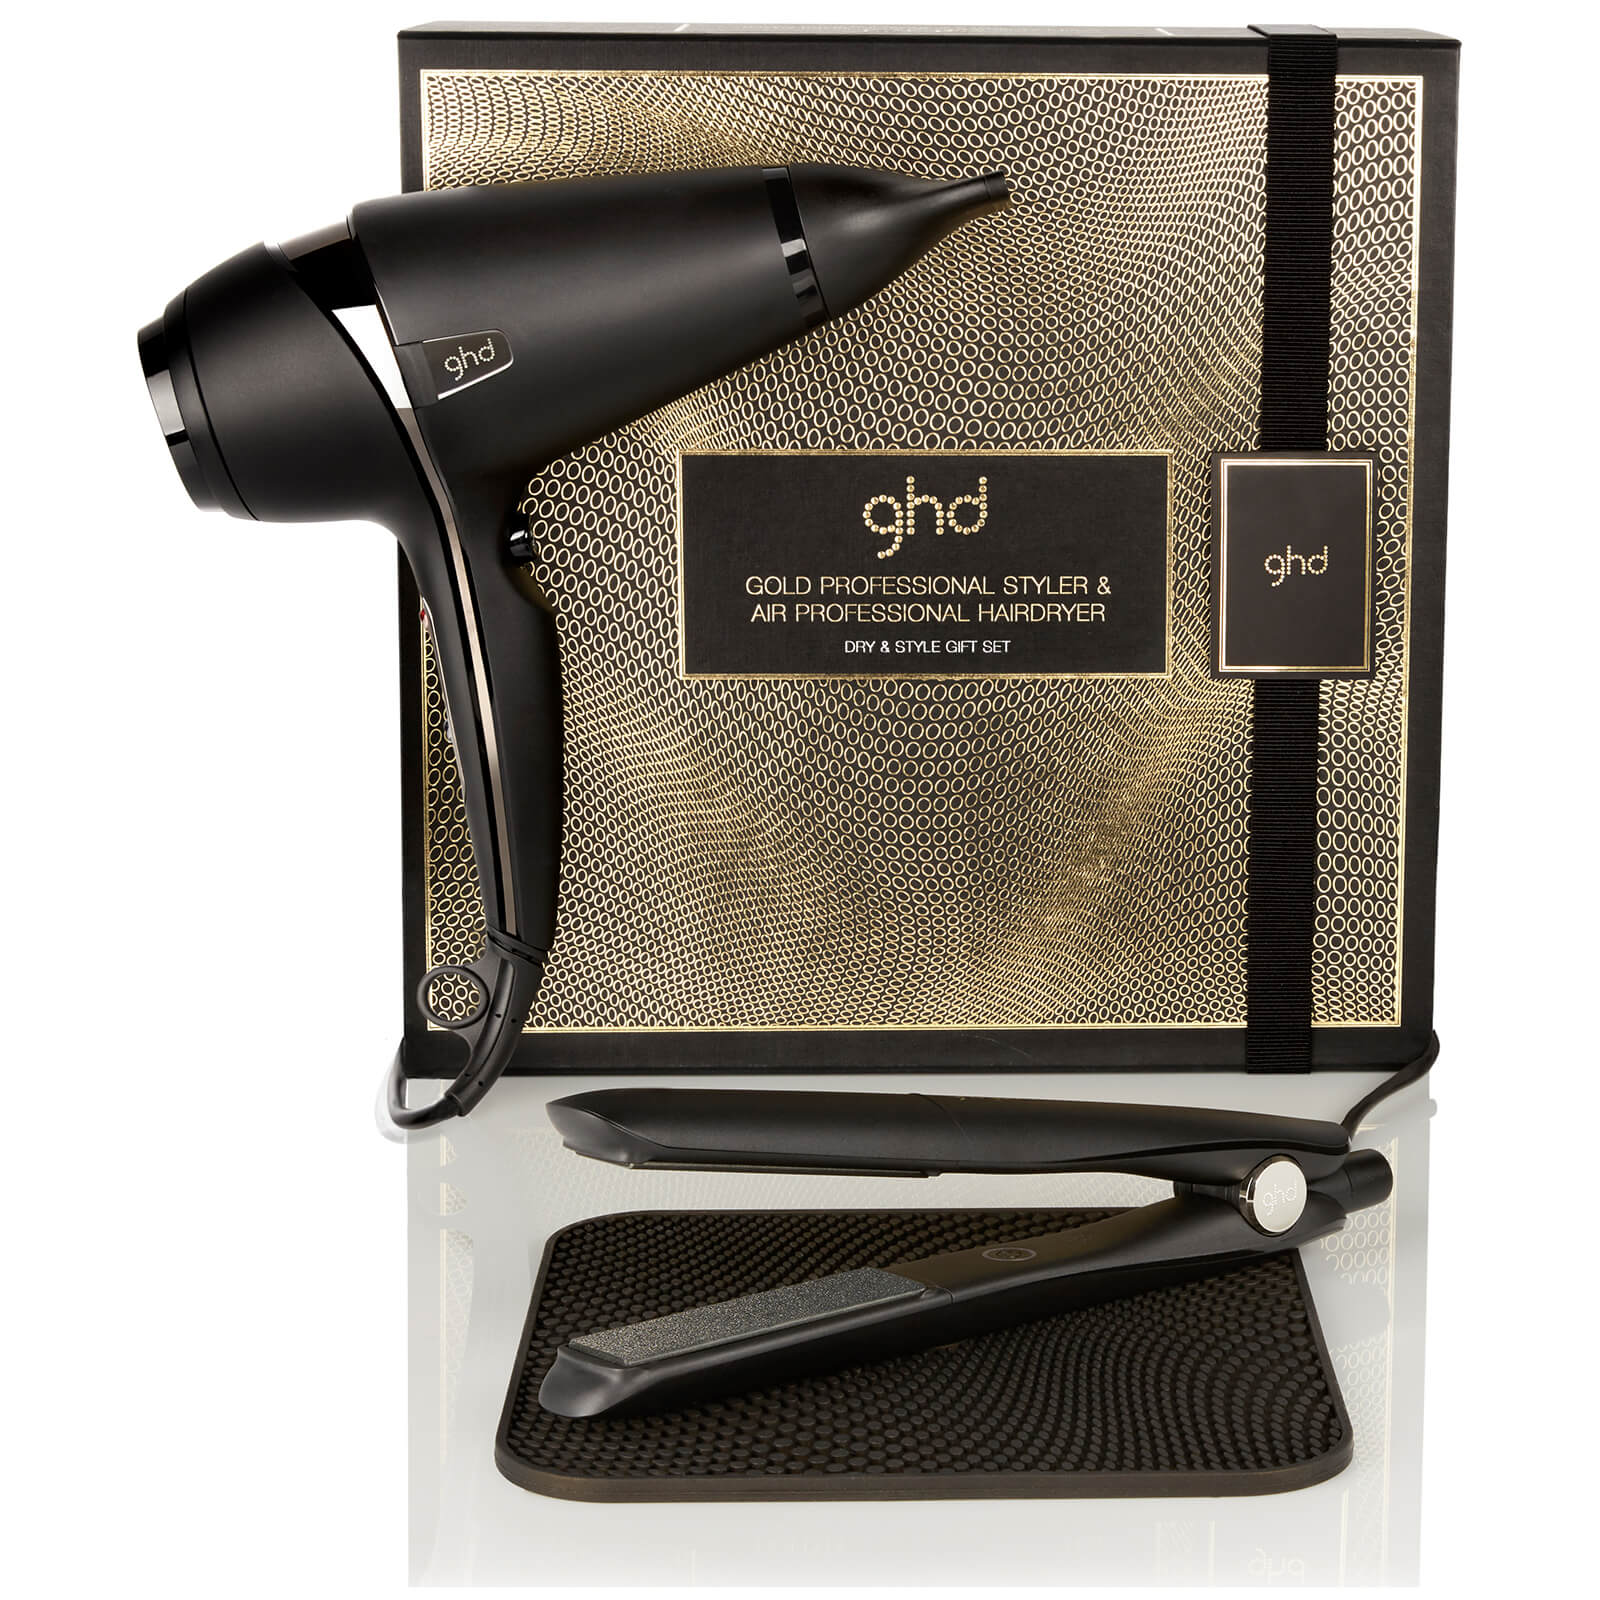 ghd Air Hairdryer and Gold Styler Gift Set